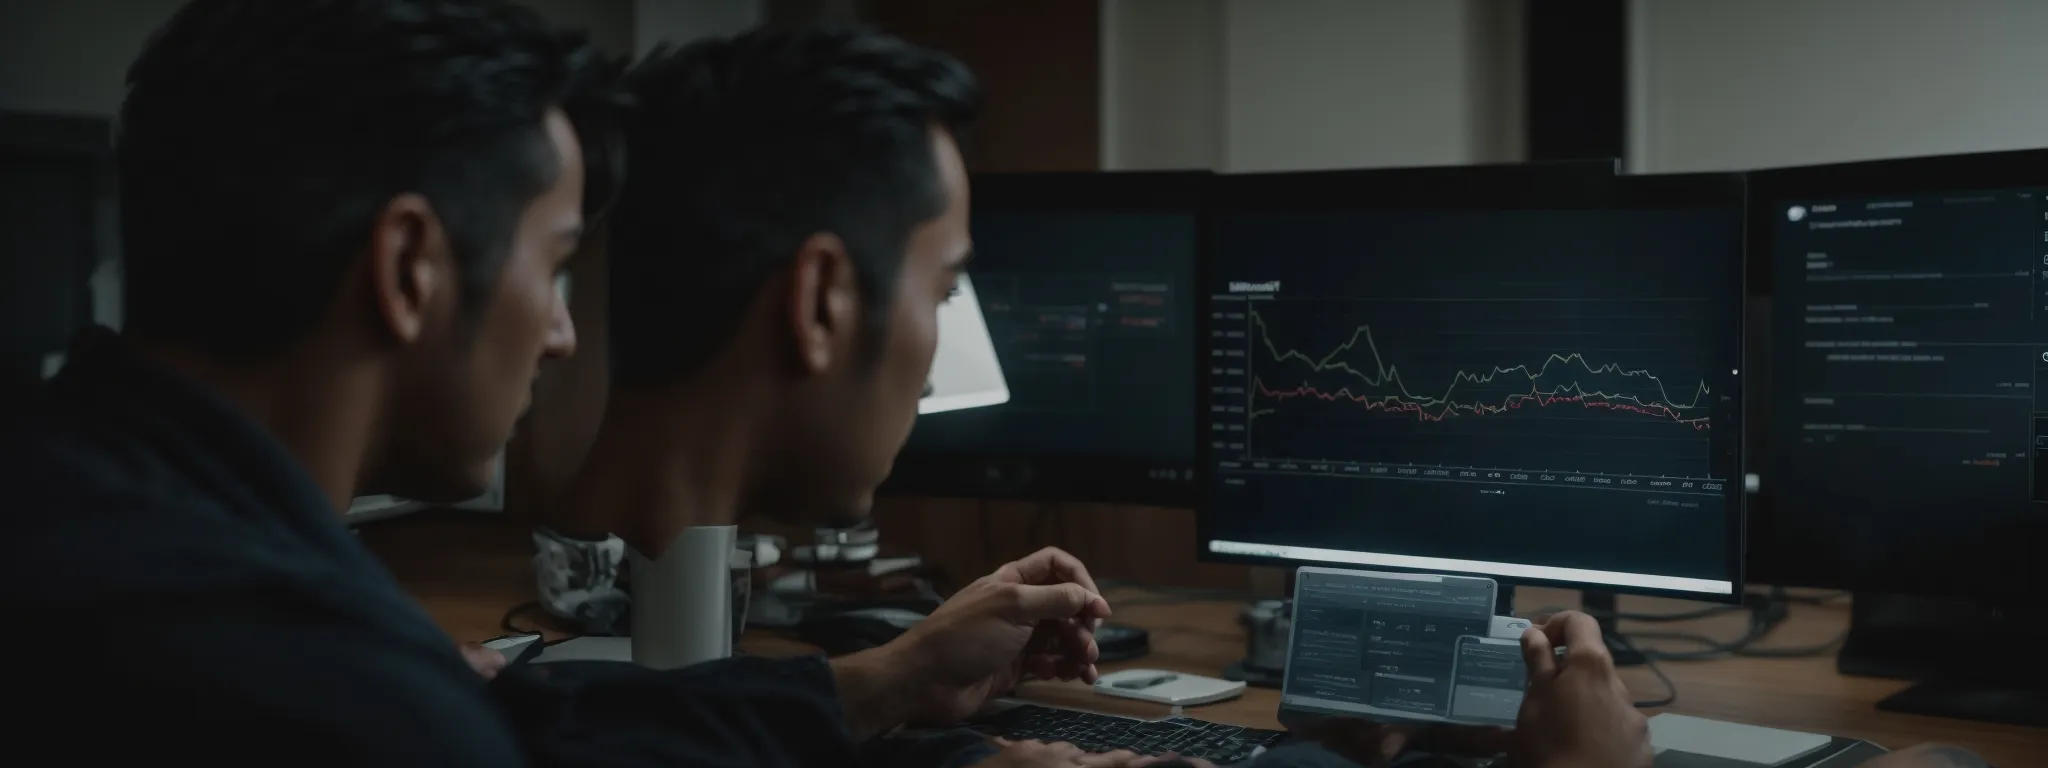 a marketer analyzes graphs on a computer dashboard, strategizing over a digital marketing campaign.